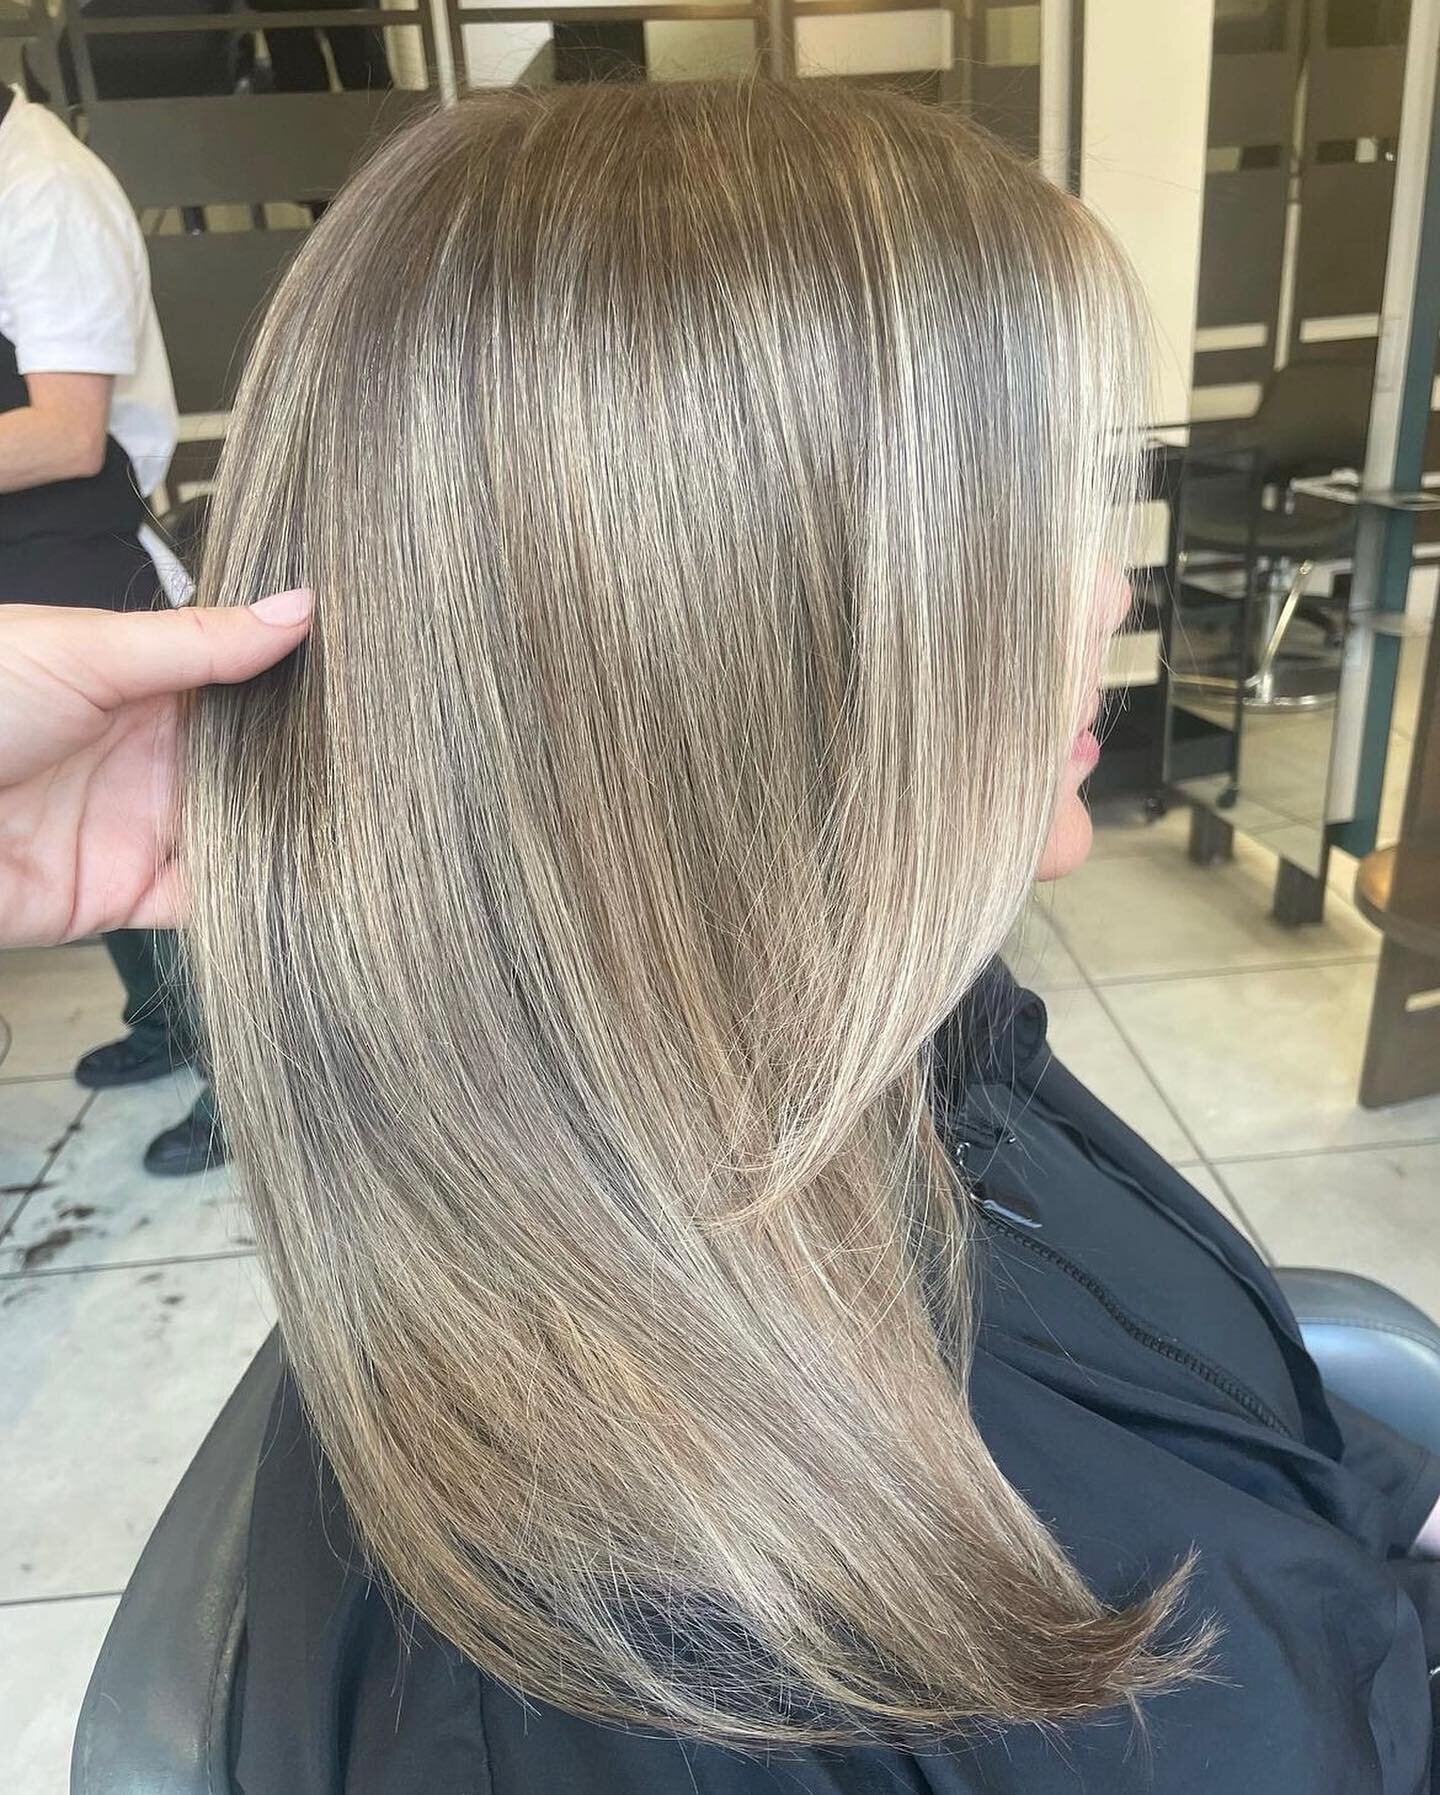 Colour correction perfection.
By Jessica.